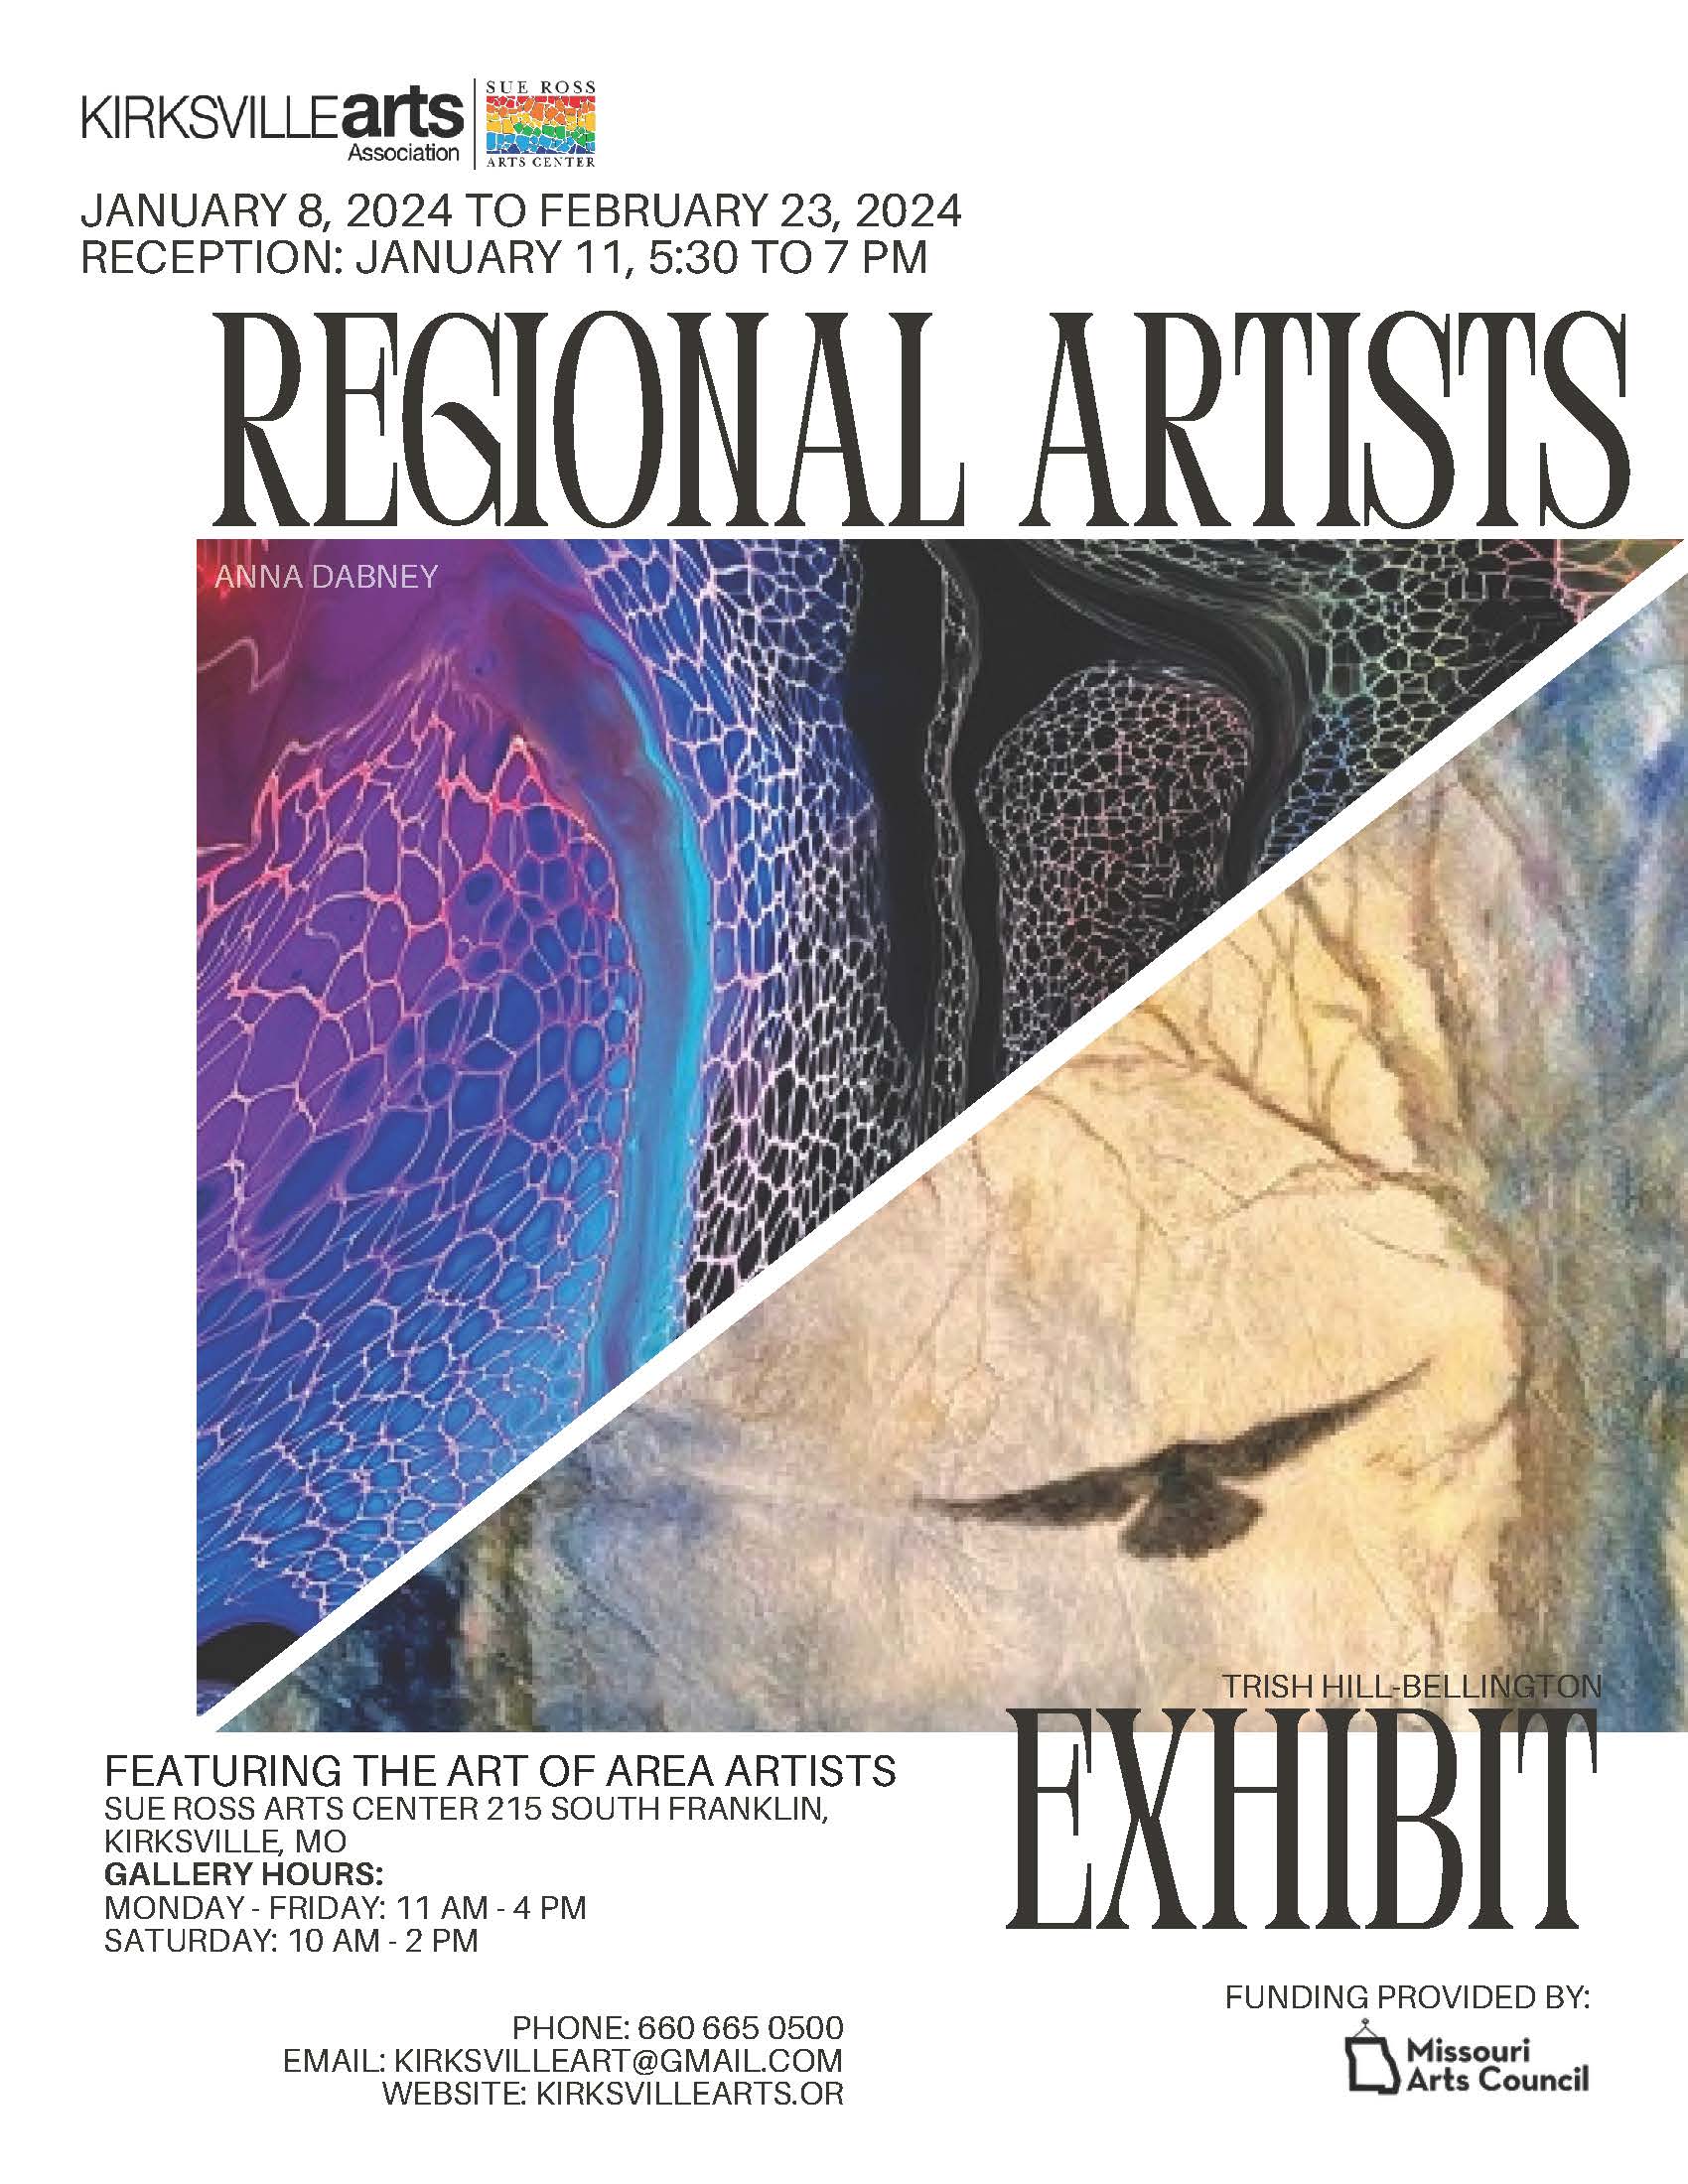 Check more about Regional Artists Exhibit